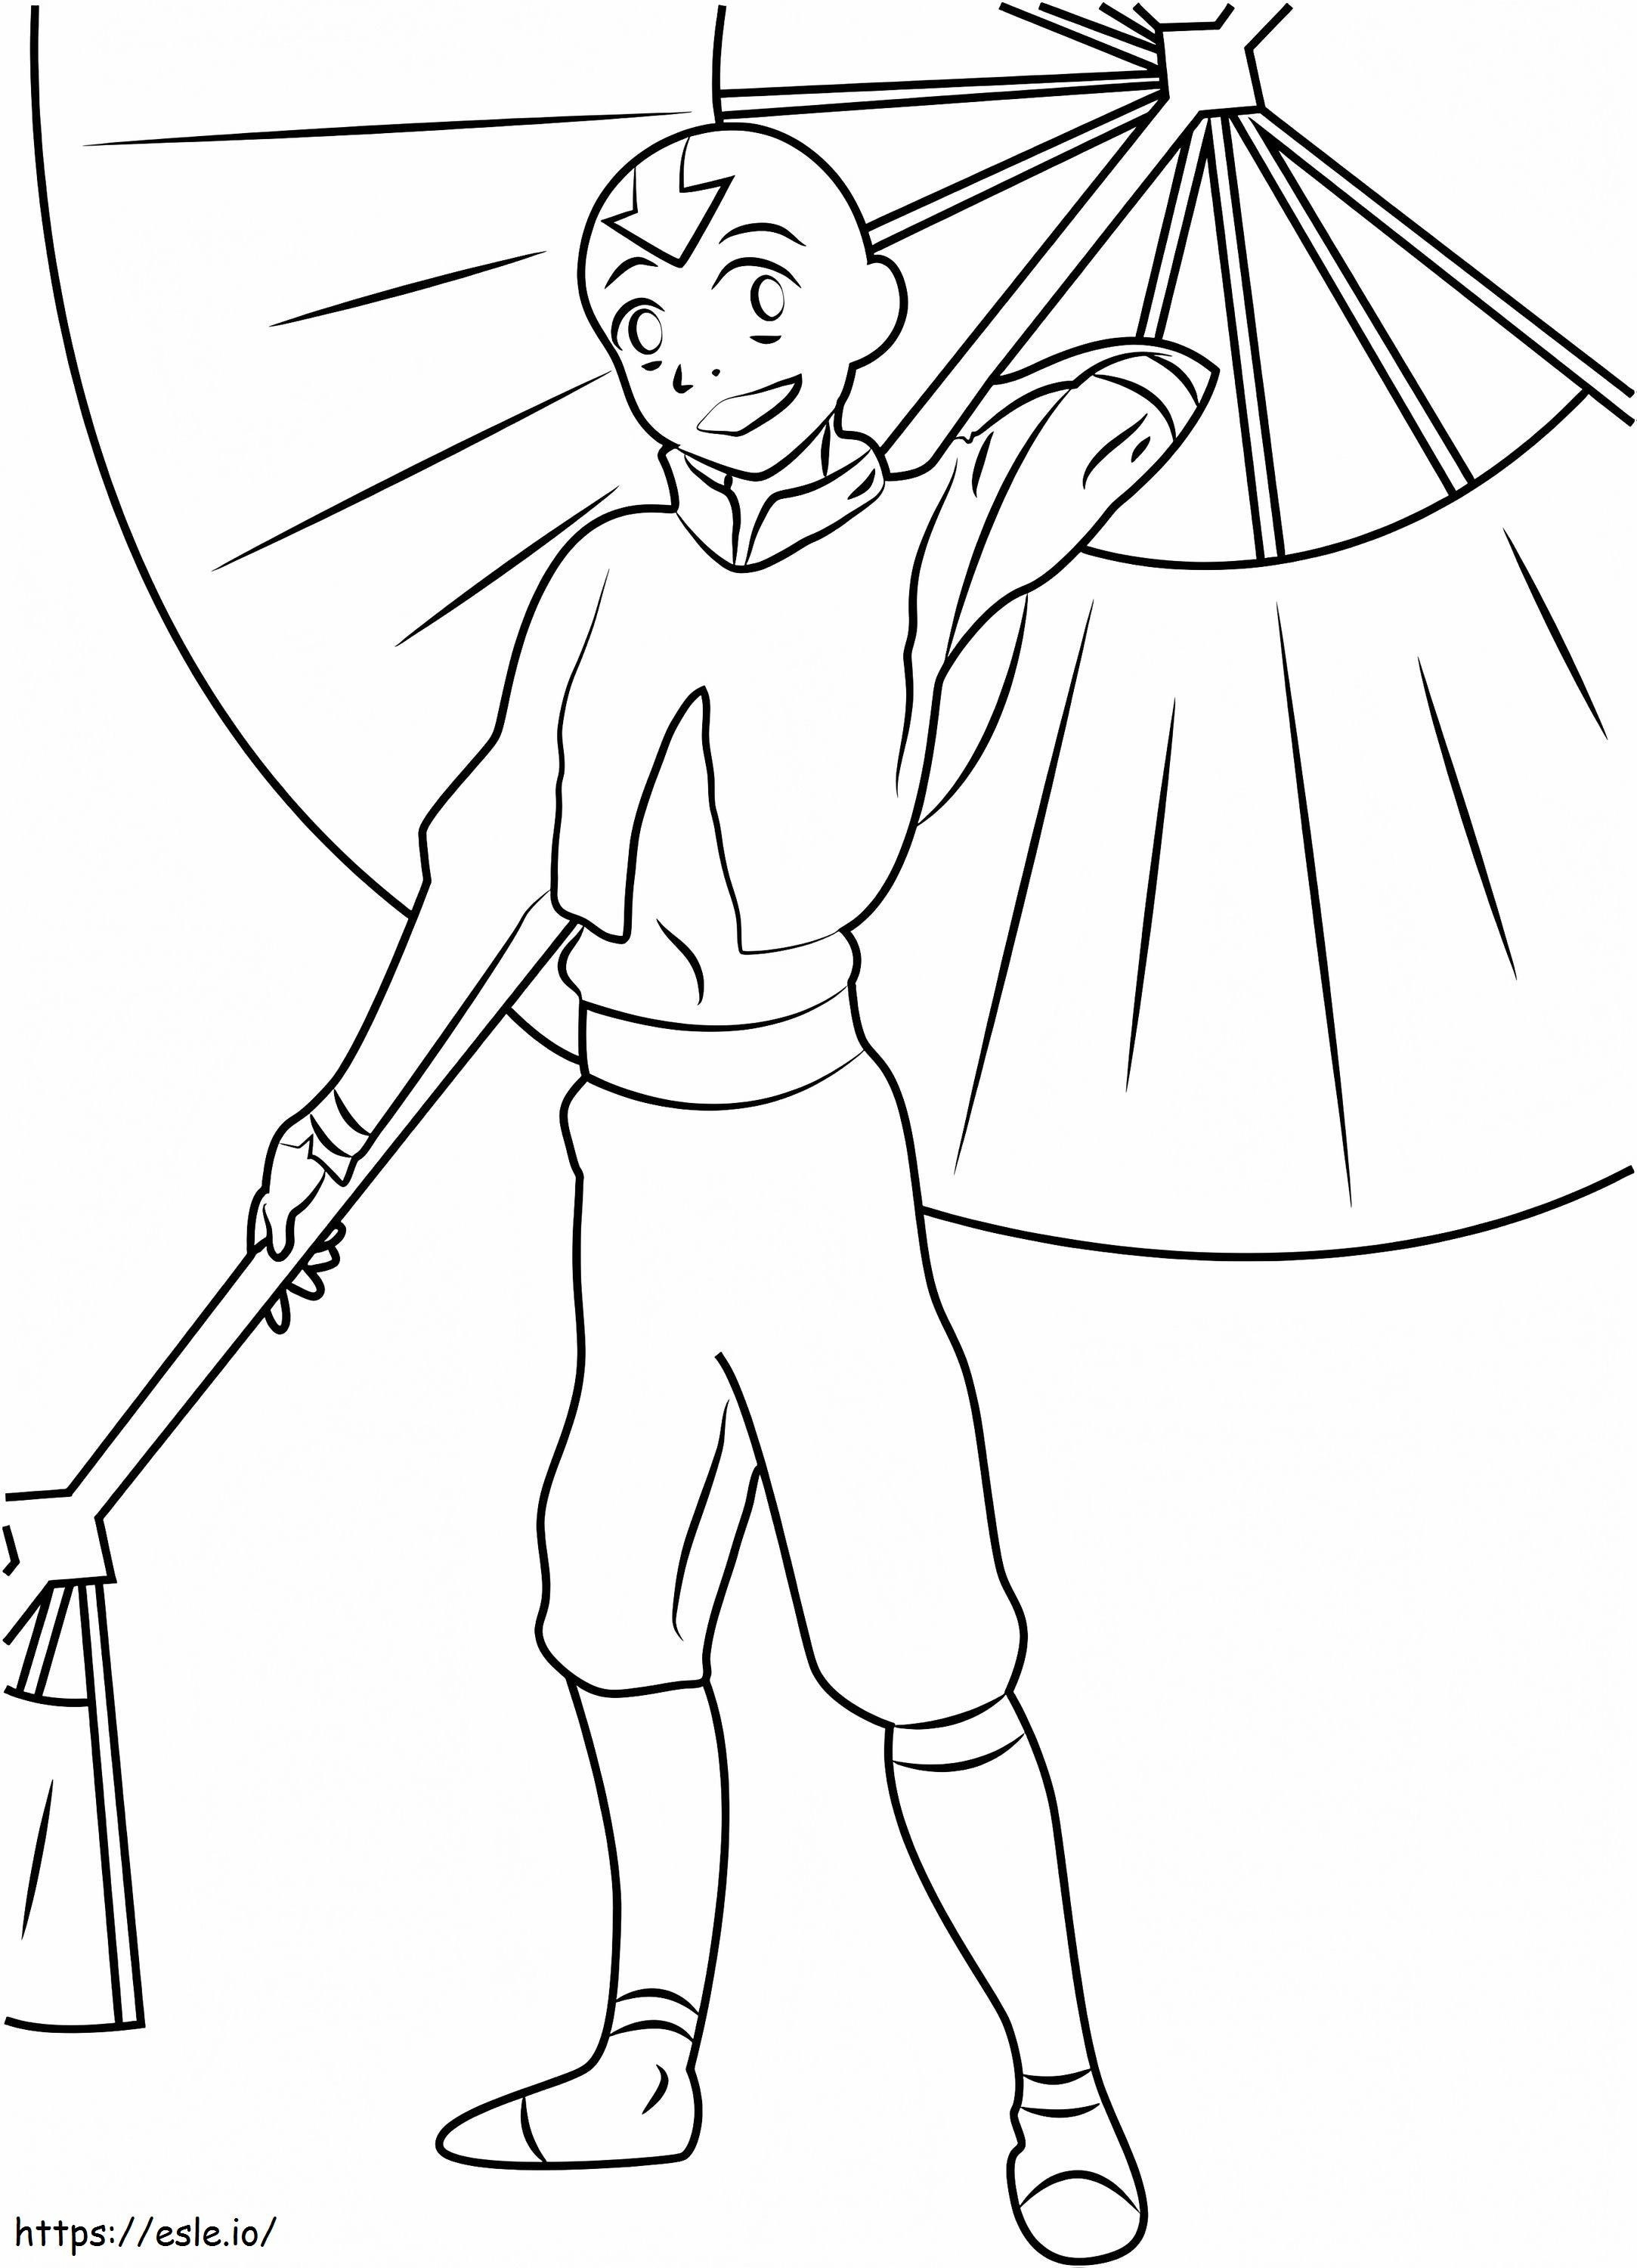 1532491257 Happy Aang With Umbrella A4 coloring page